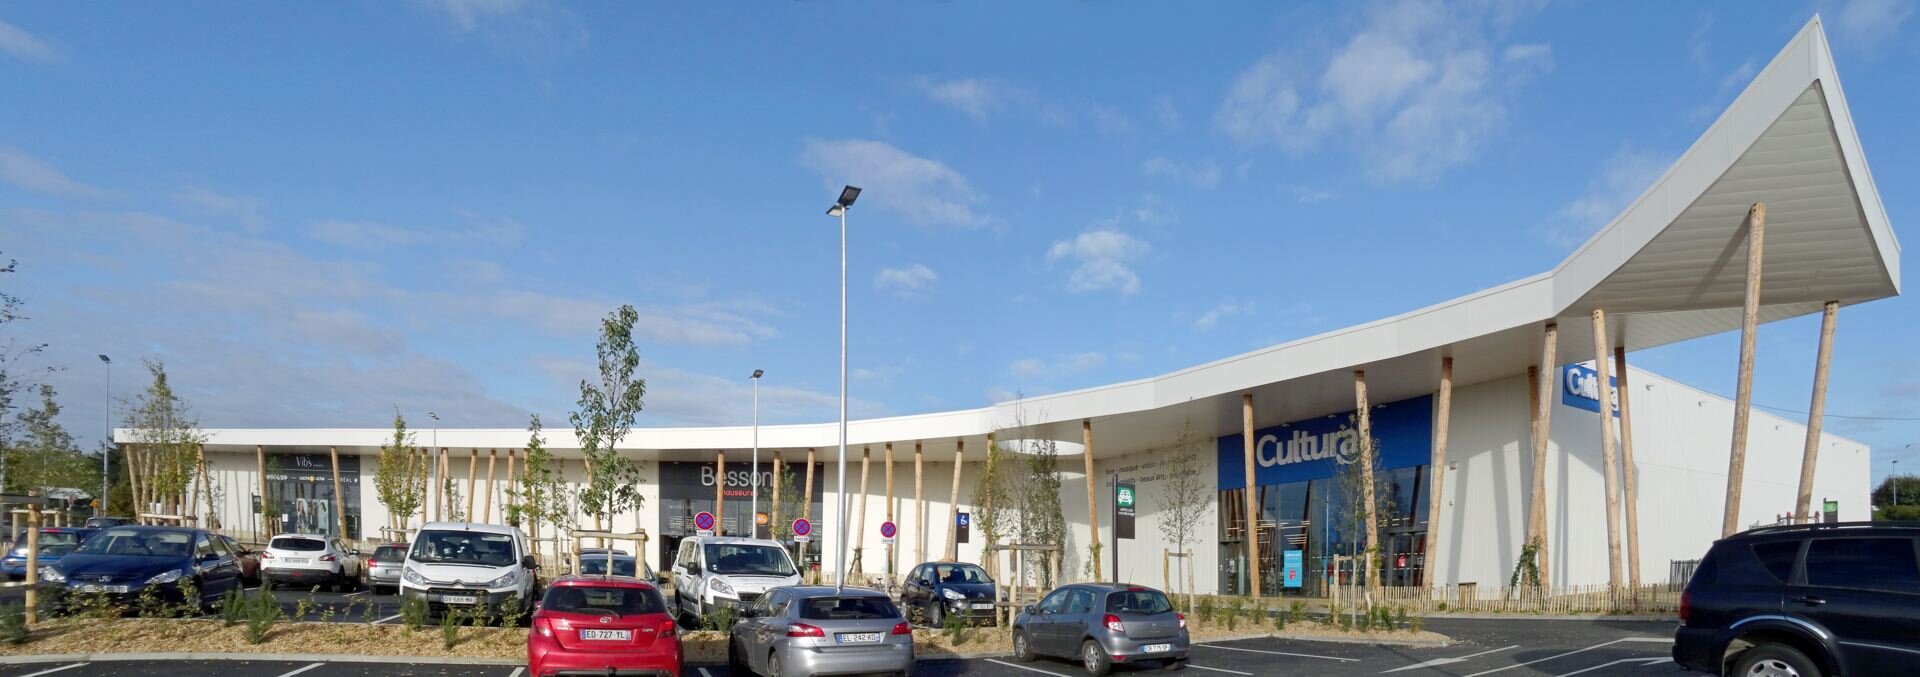 Strip Mall Carrefour -  Rambouillet